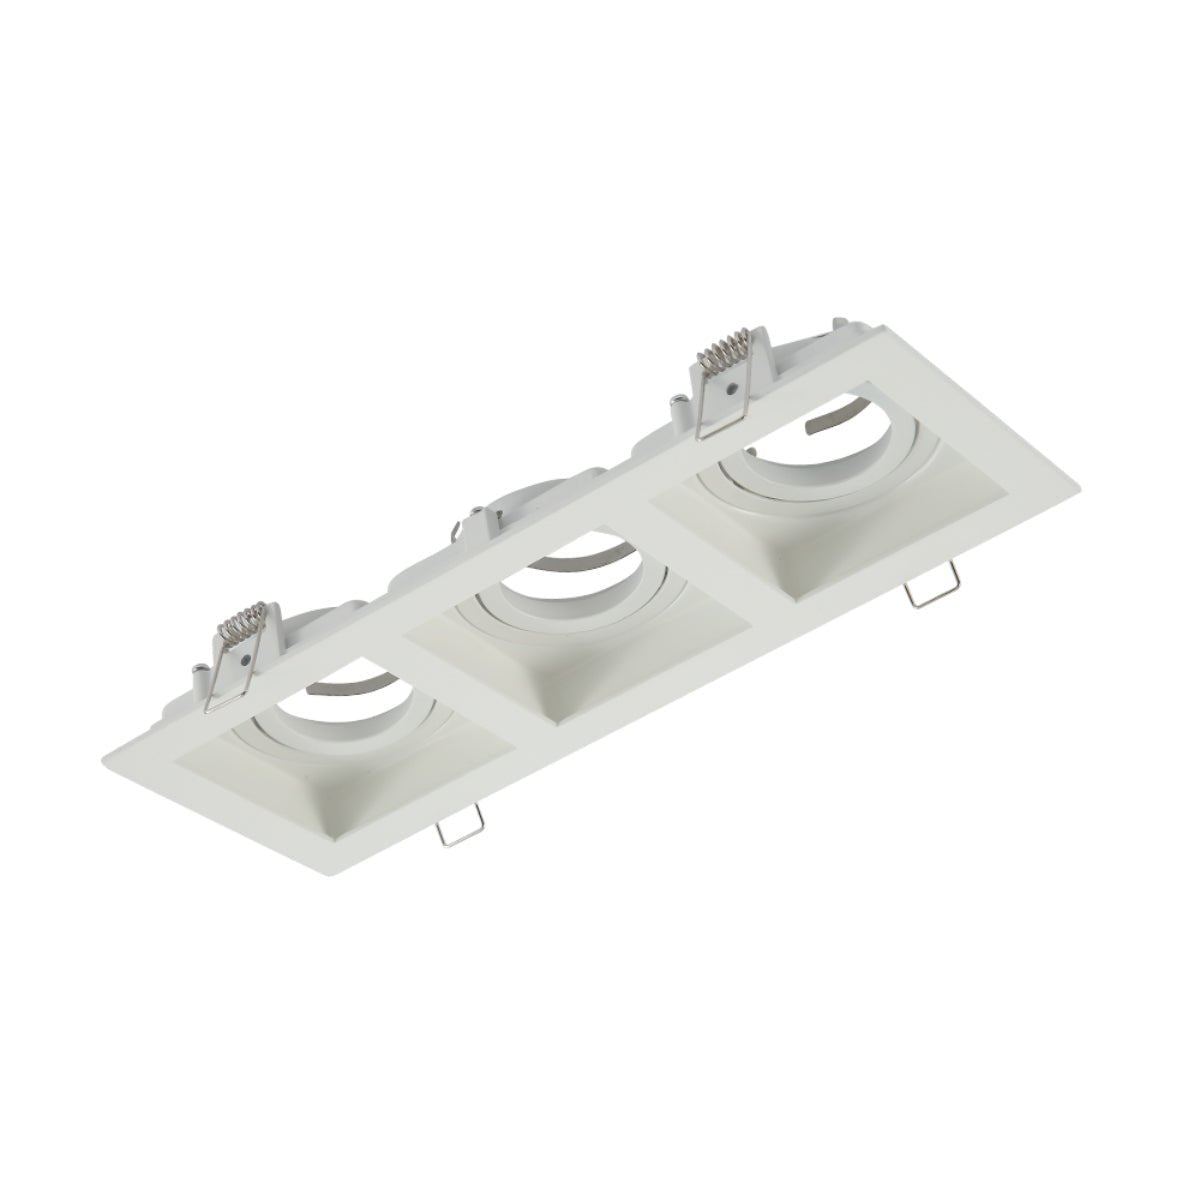 Main image of Grille Recessed Tilt Downlight White with 3xGU10 Fitting | TEKLED 165-03876